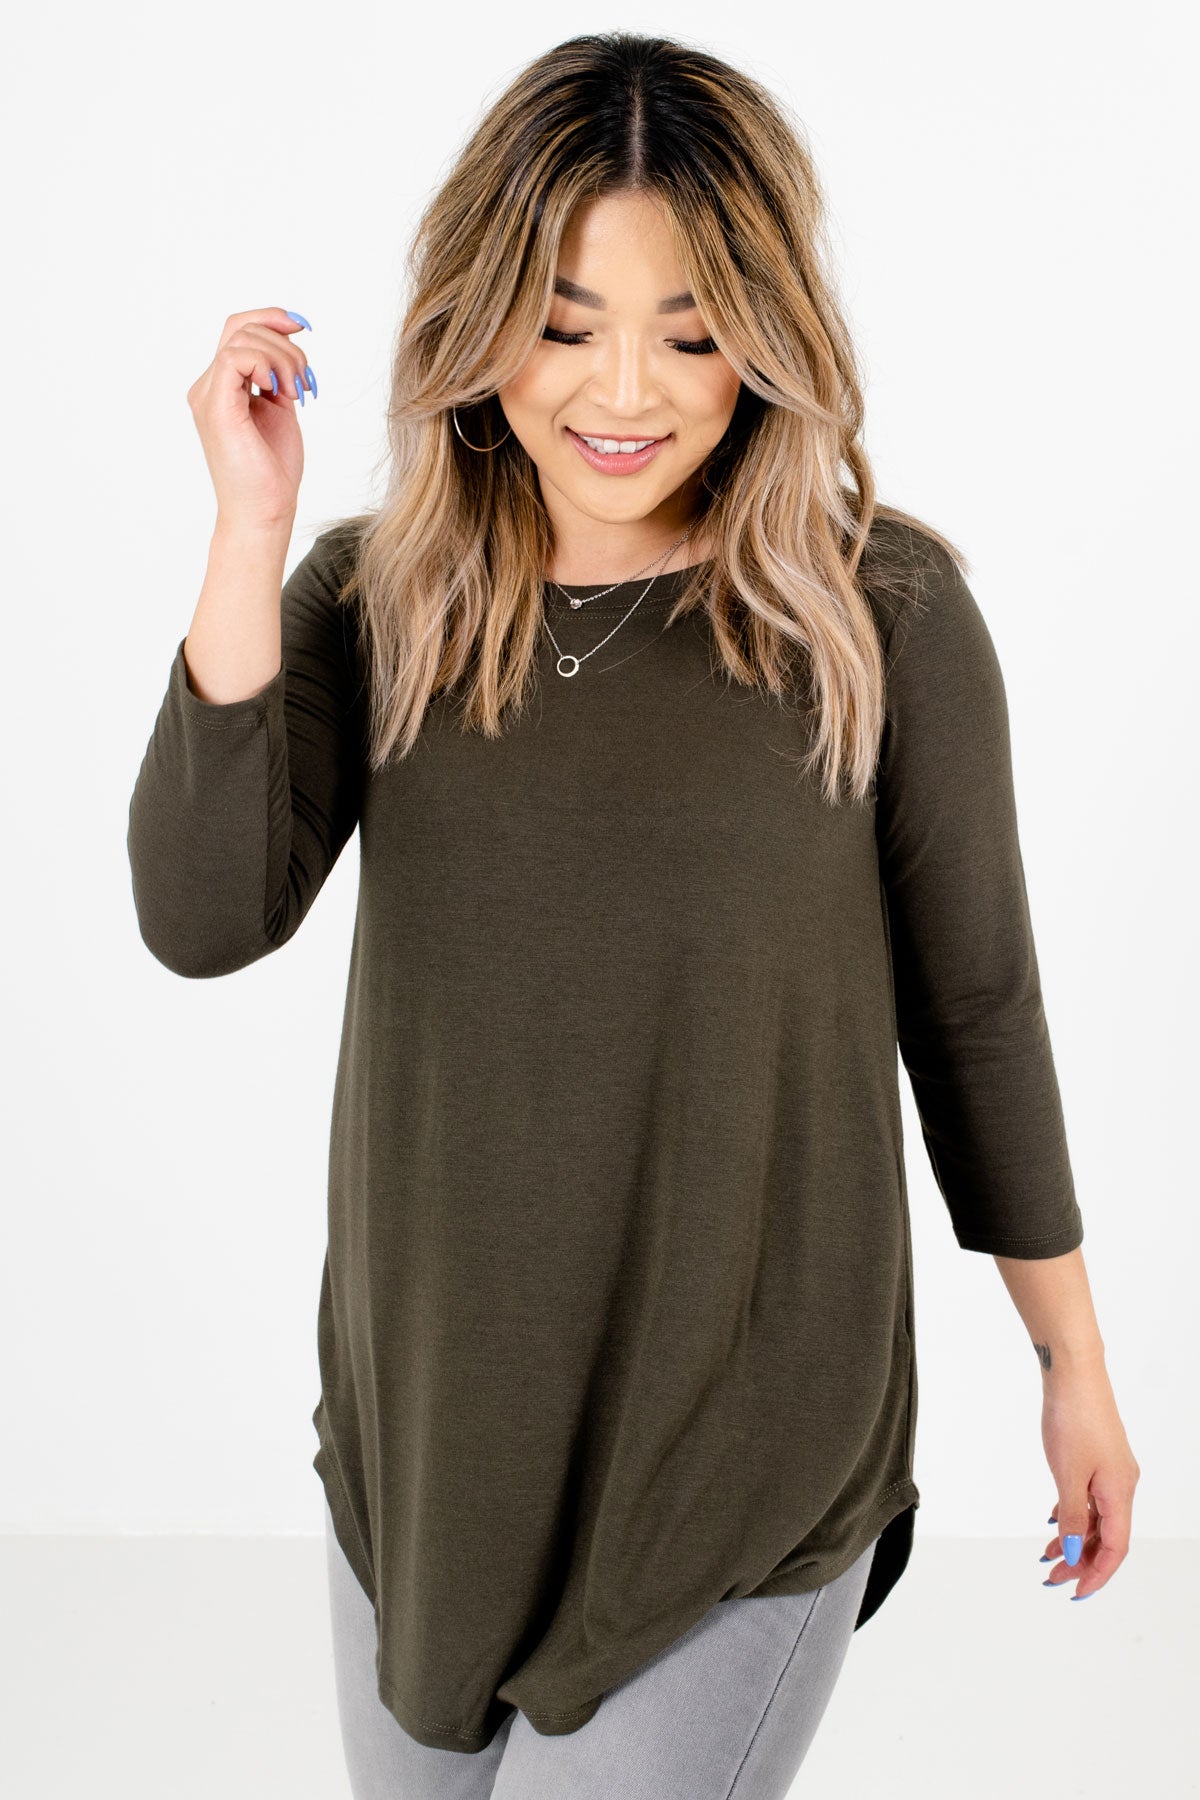 Olive Green ¾ Length Sleeve Boutique Tops for Women